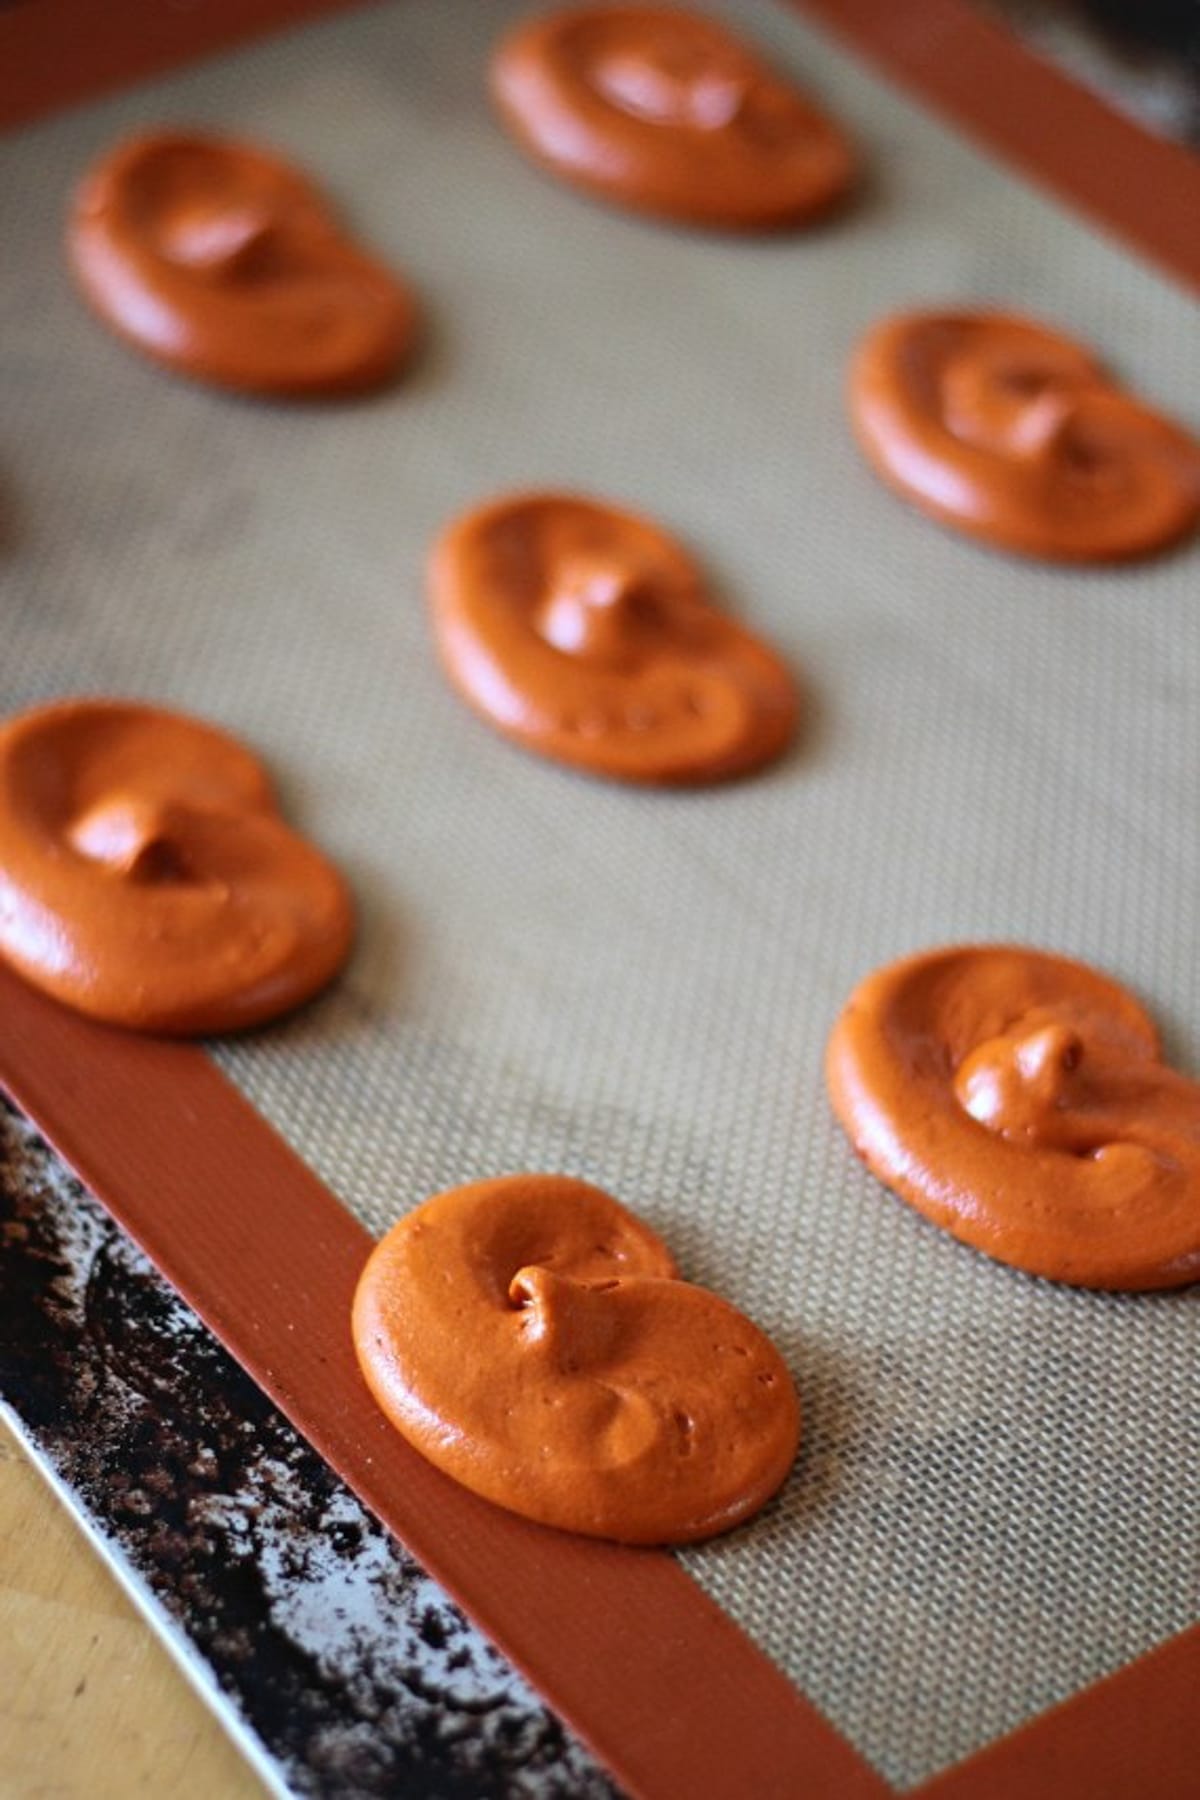 Orange batter piped on a silicone lined baking sheet in the shape of pumpkins